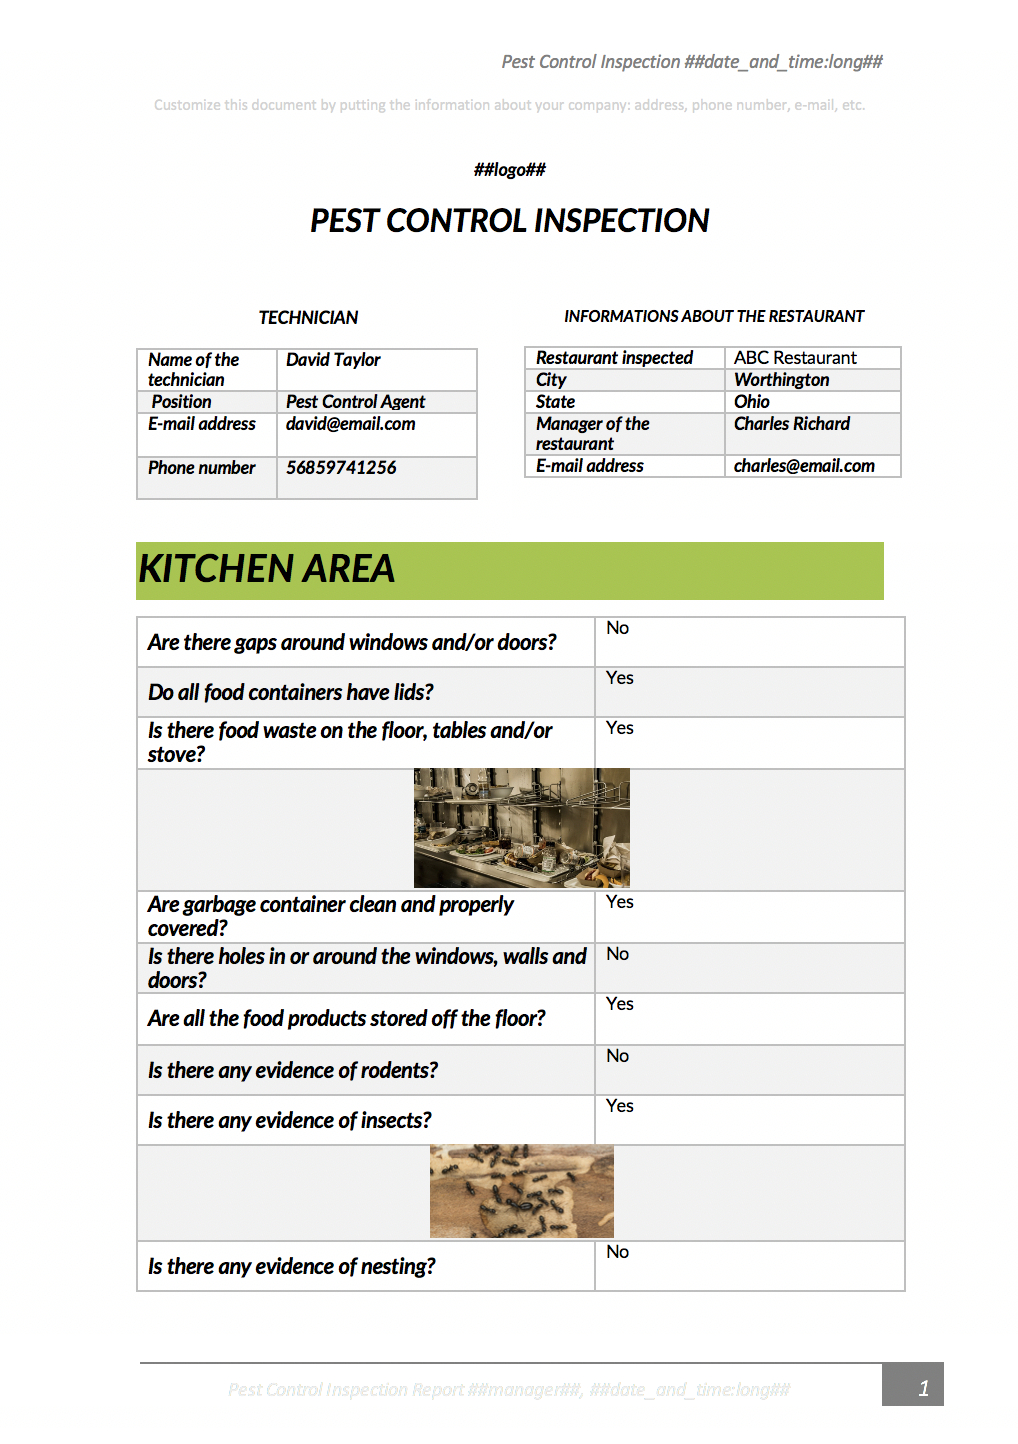 Pest Control Inspection With Kizeo Forms From Your Cellphone In Pest Control Report Template